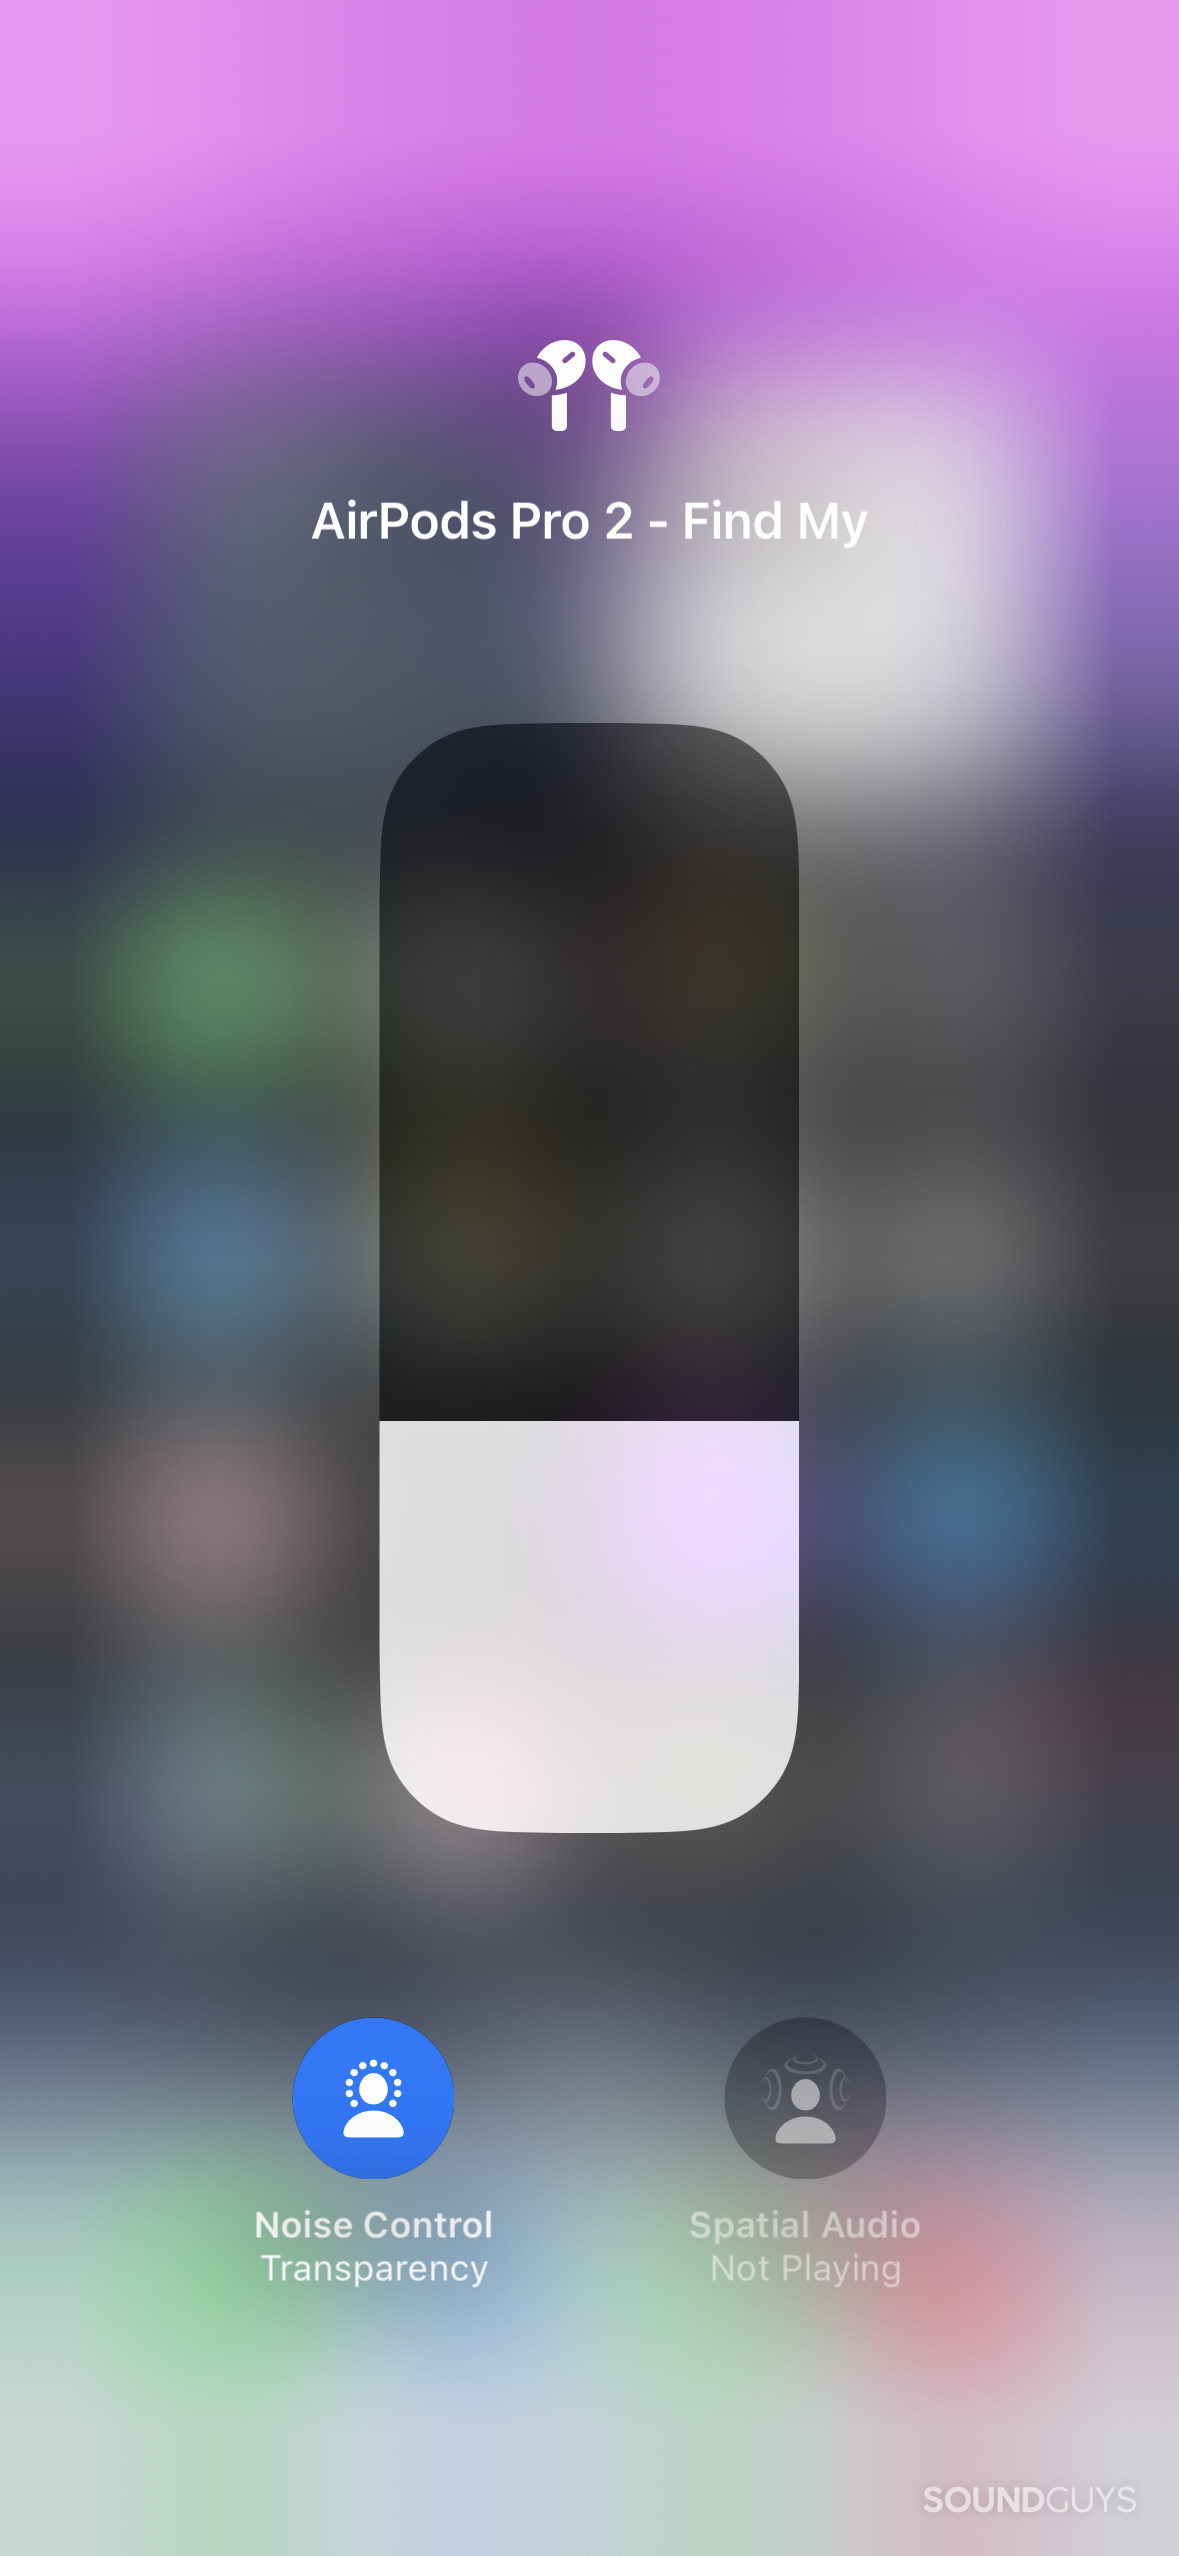 Volume and noise controls for AirPods Pro on an iOS device in the control center.